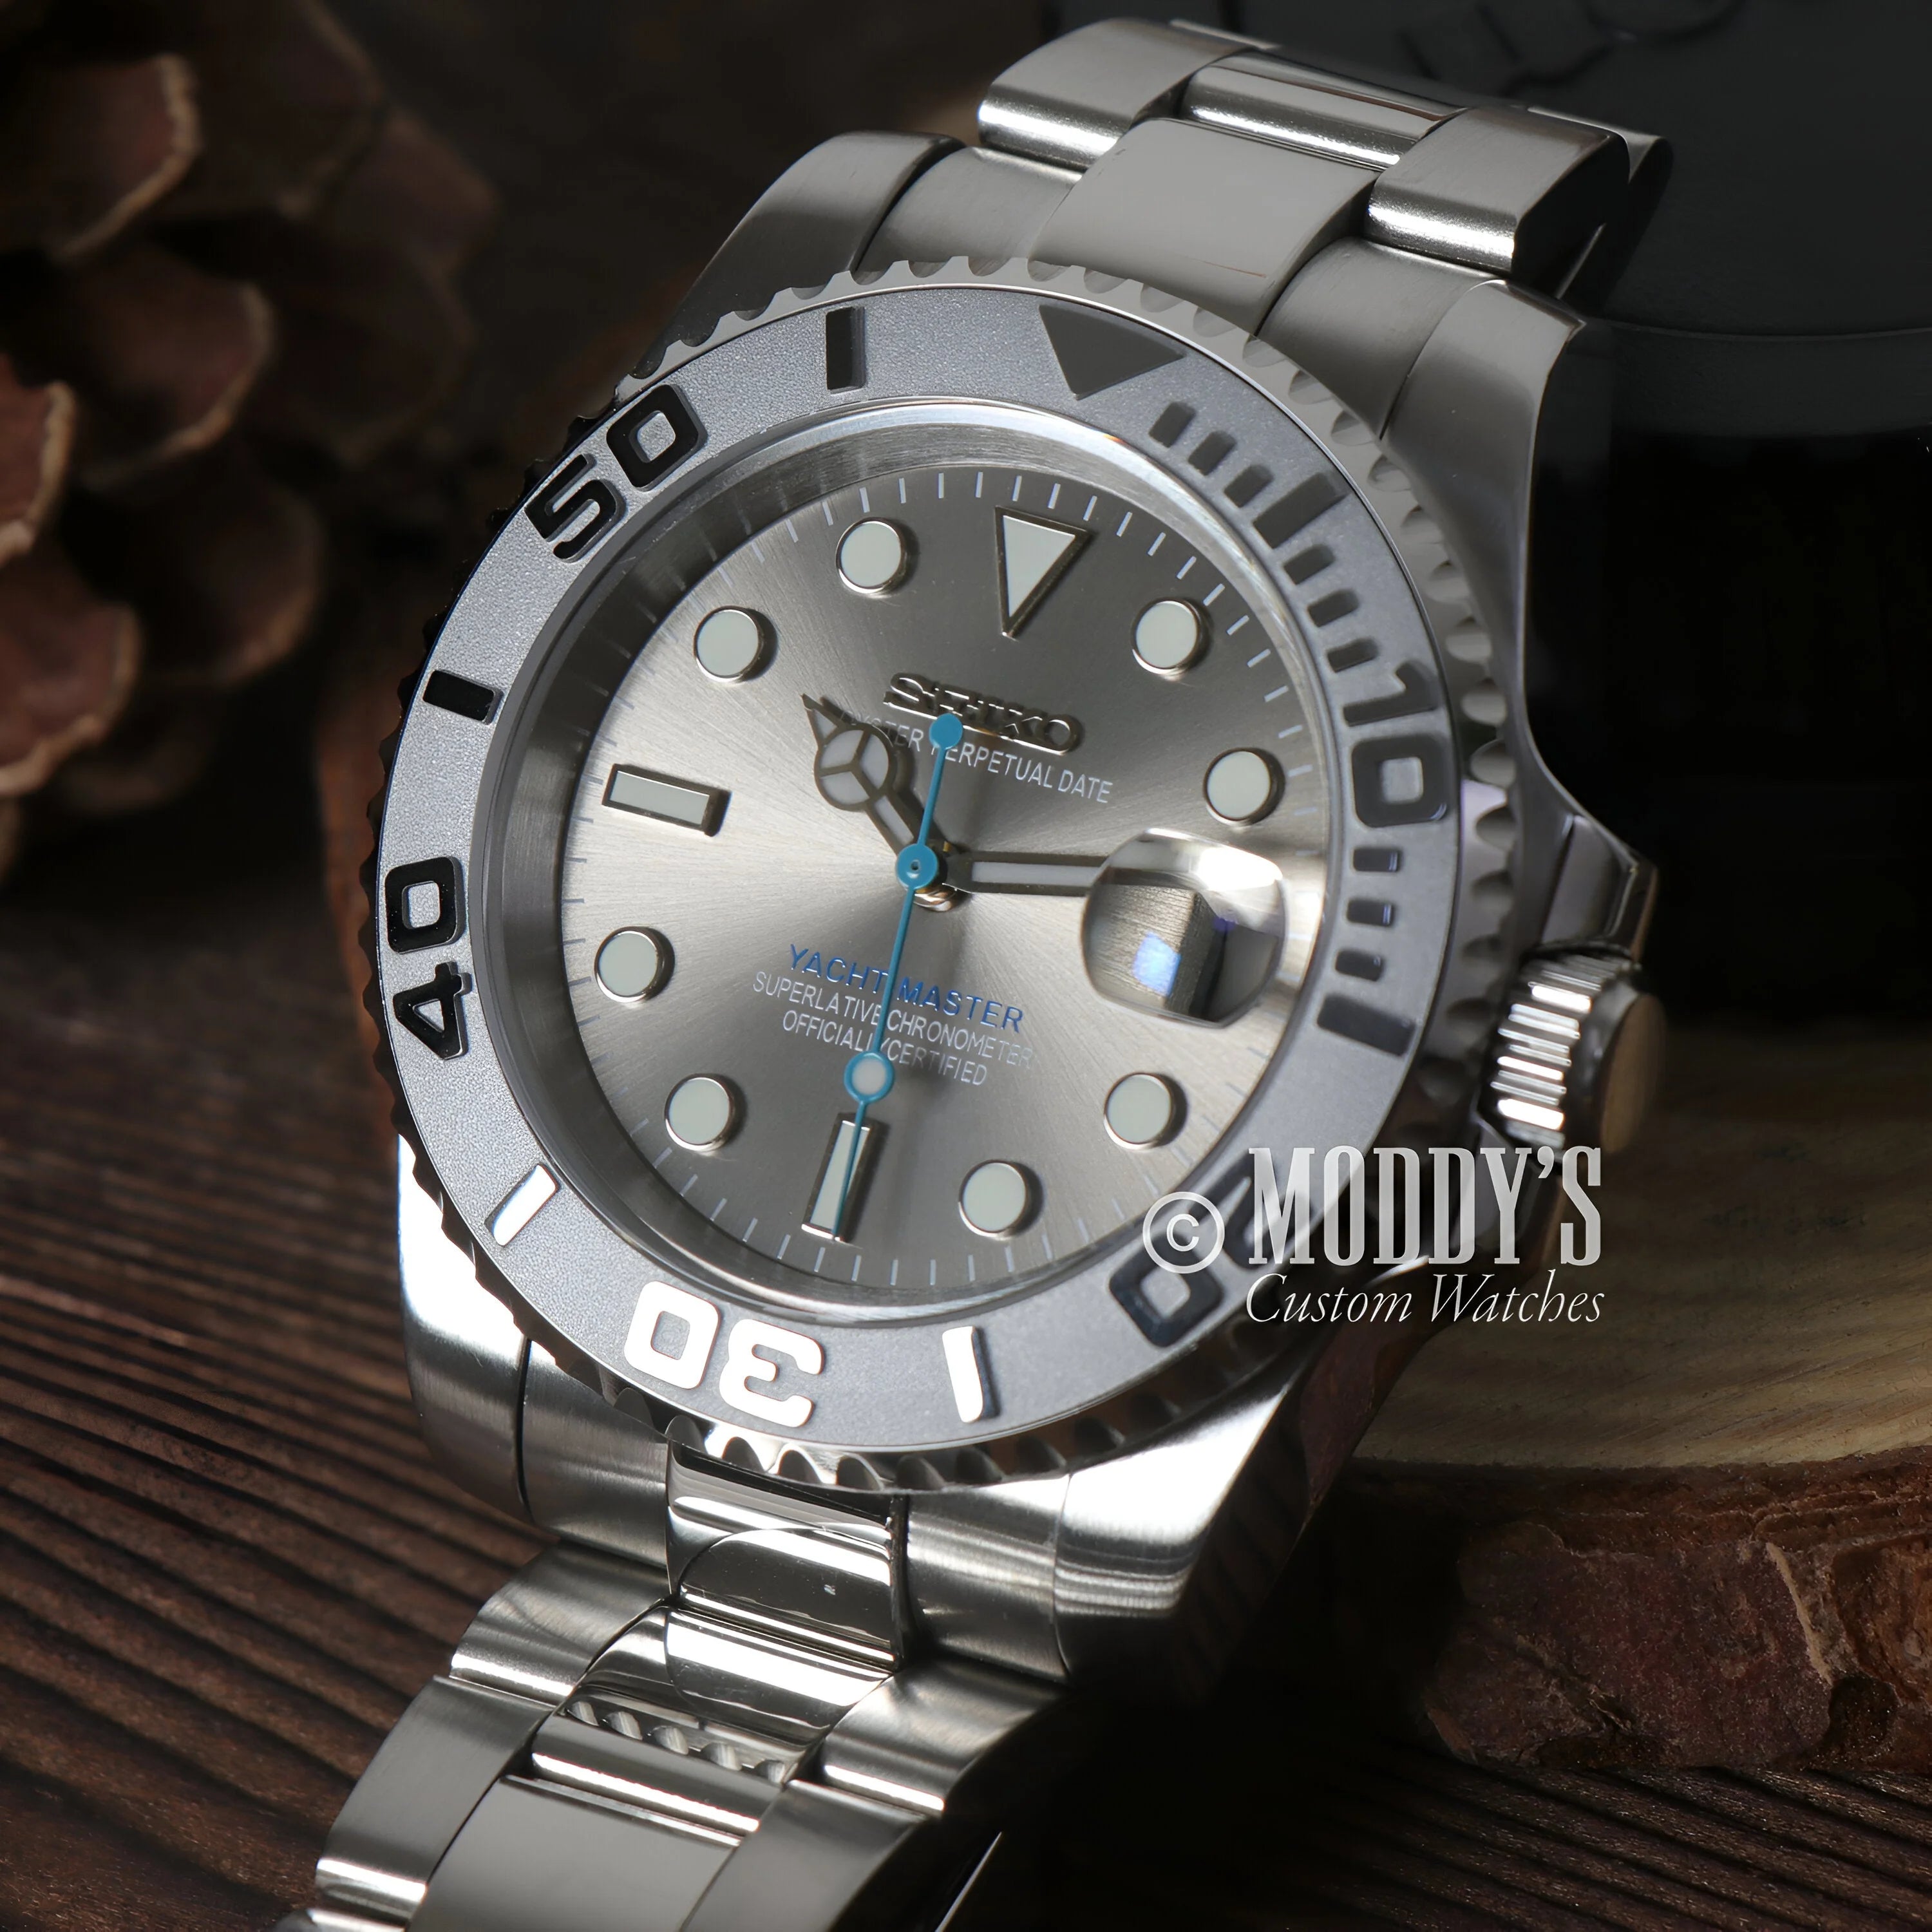 Seiko Mod Submariner Style: Silver Rolex Yacht-master With Metallic Dial And Blue Hands